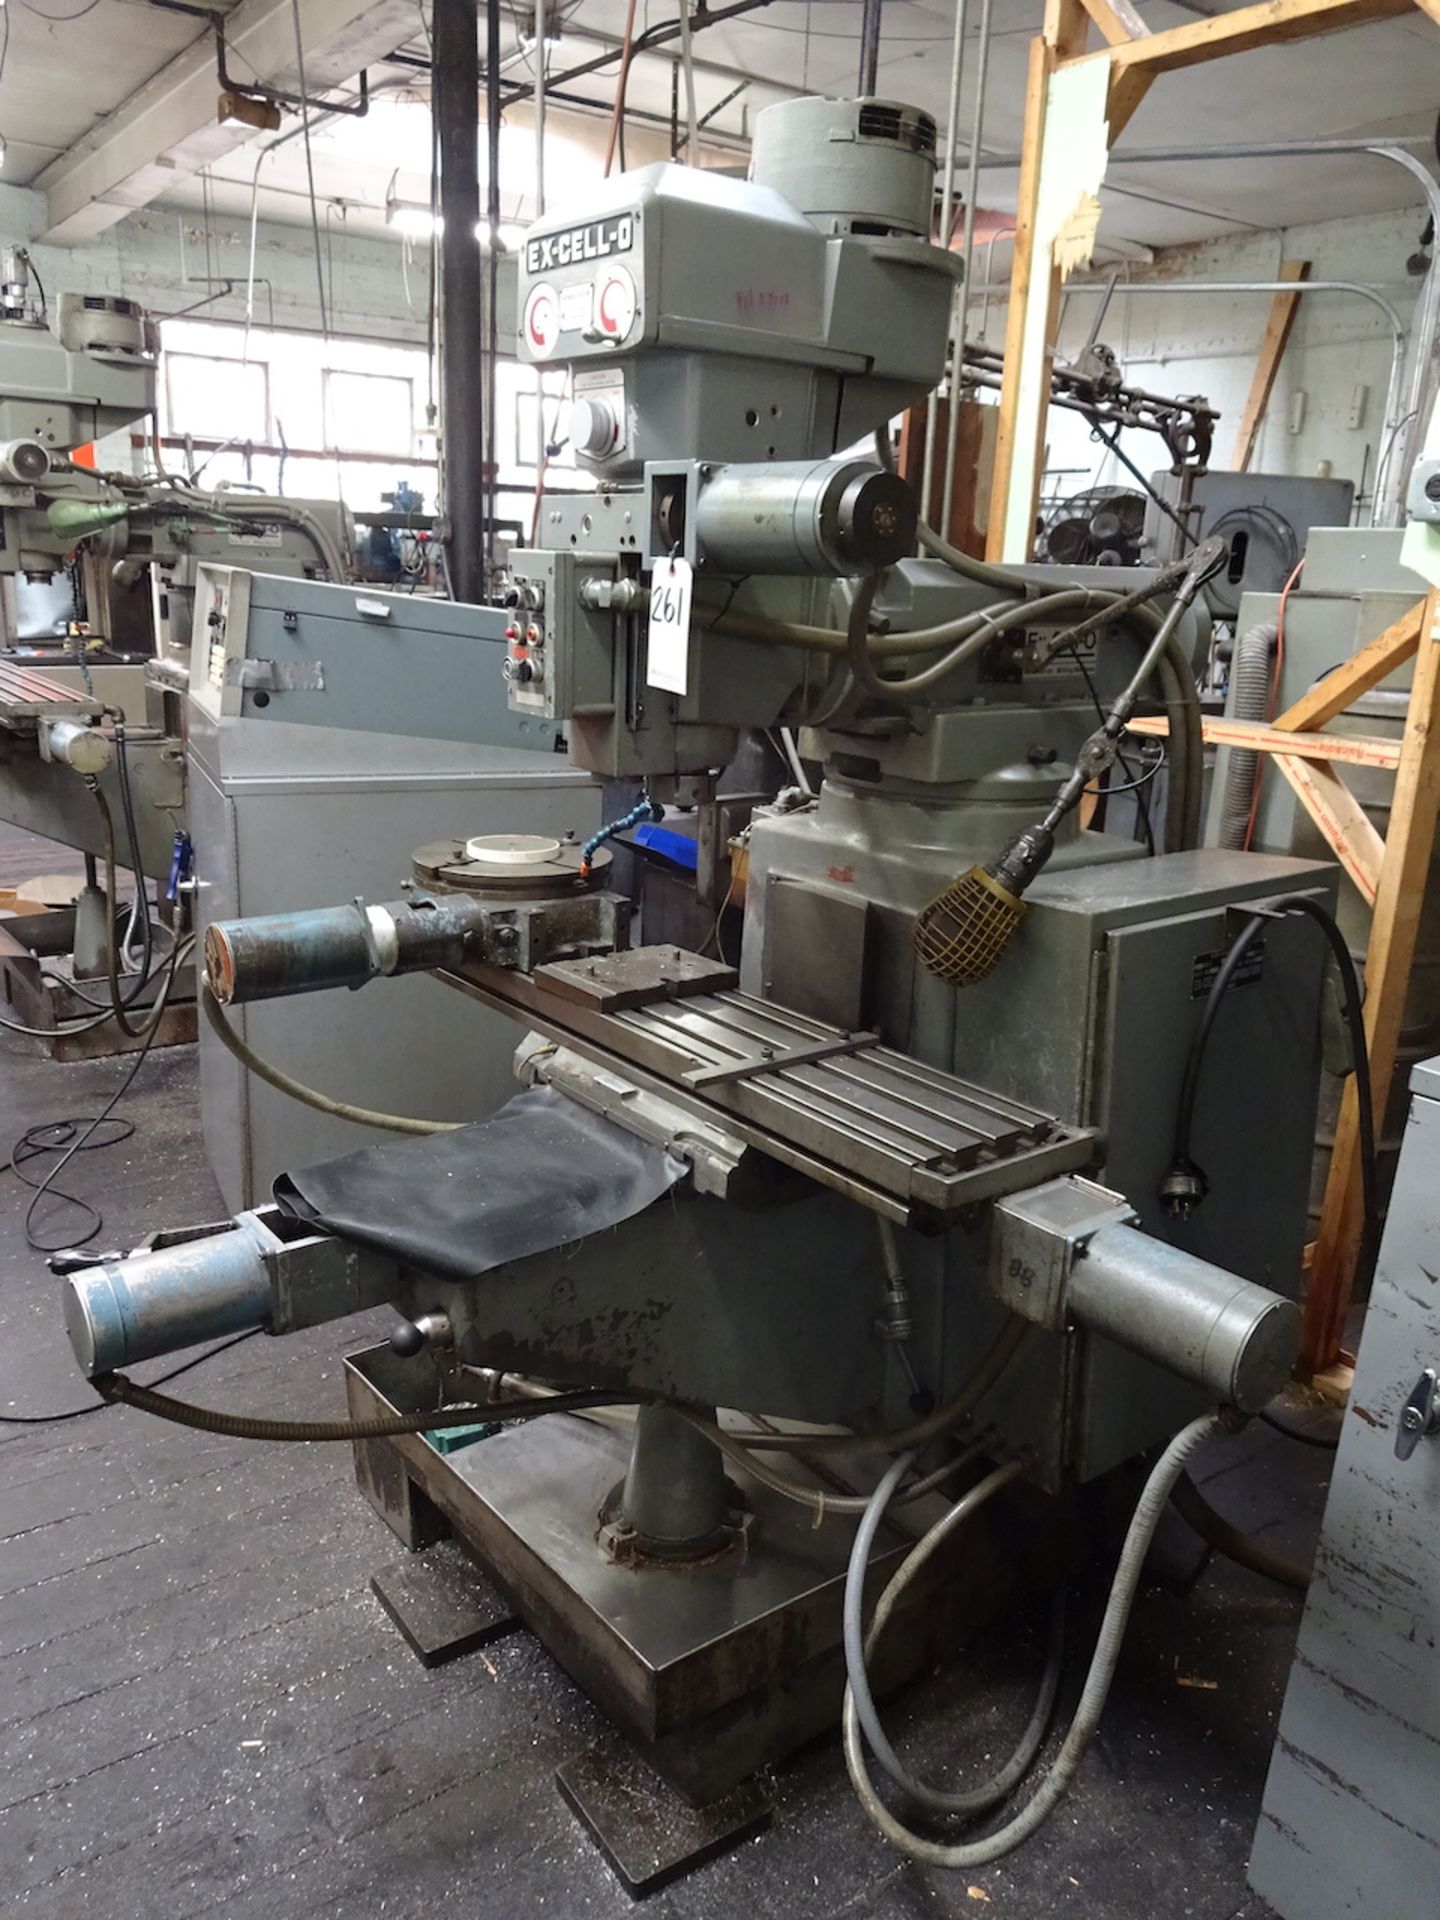 Ex-Cell-O 2 HP Style 602 Computer Controlled Vertical Milling Machine, S/N 6029820, 12 in. Rotary